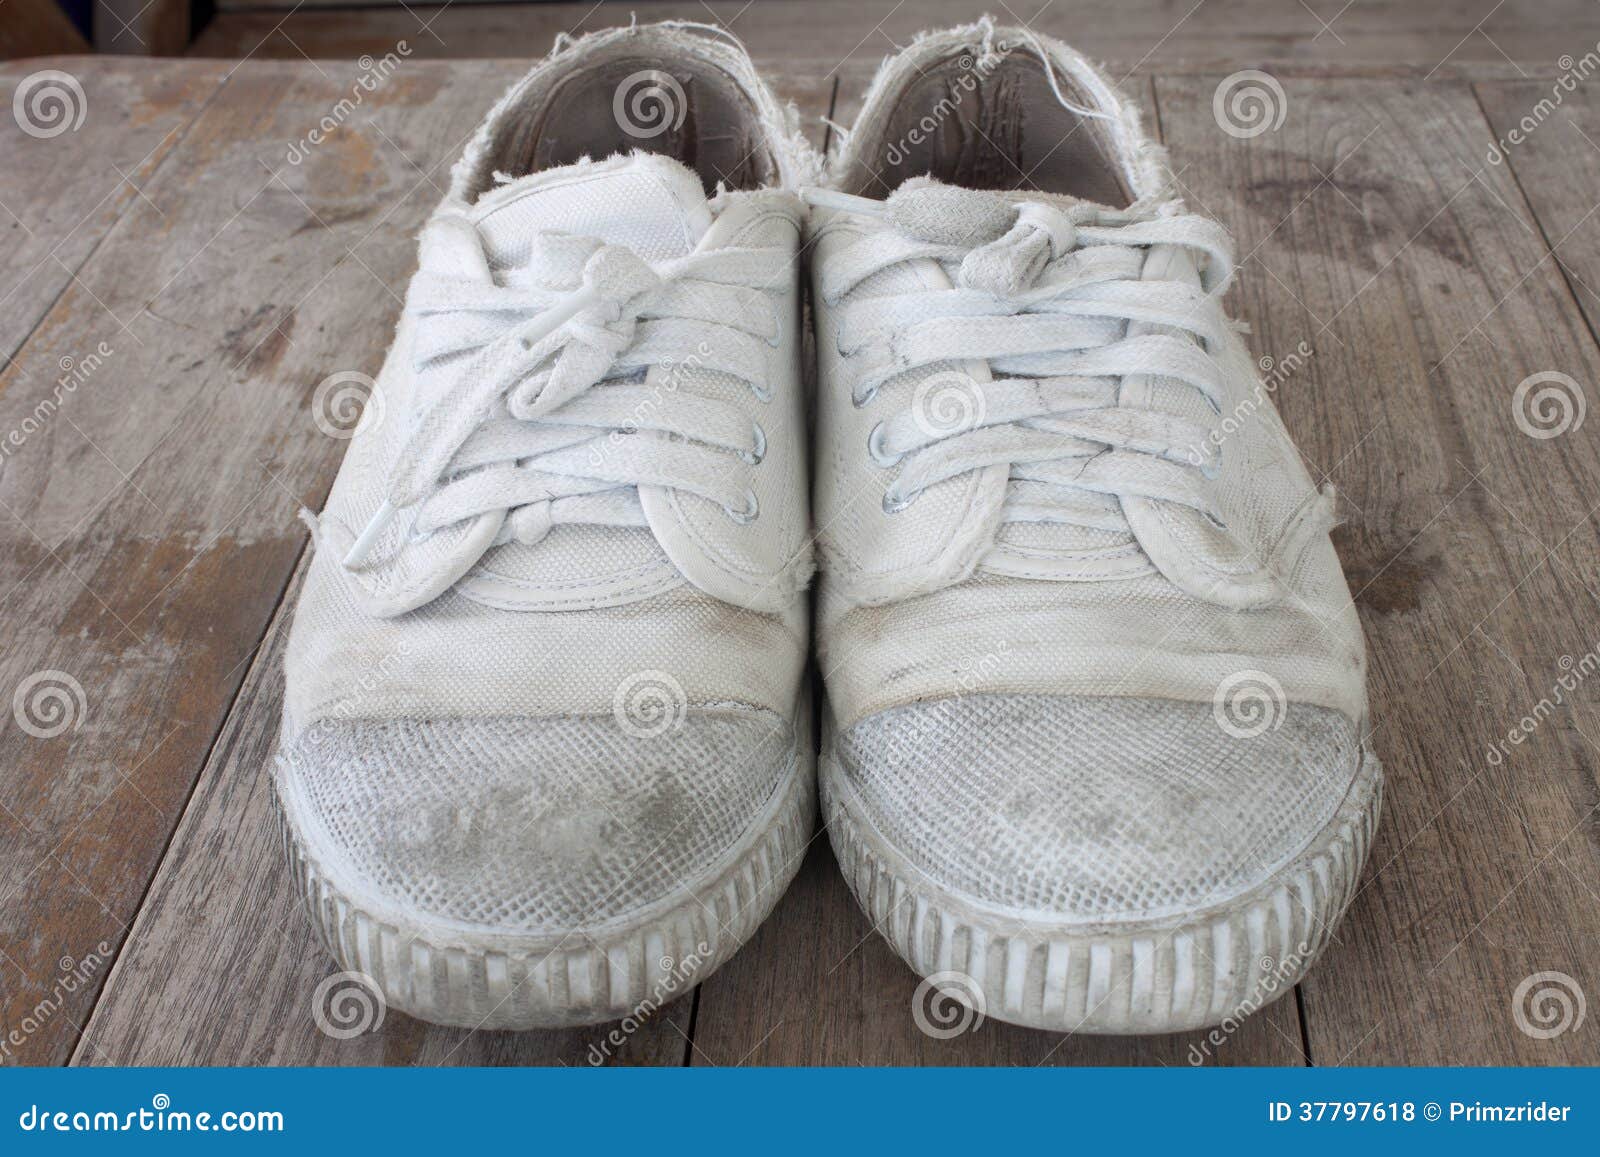 Old shoe stock photo. Image of foot, worn, dirty, training - 37797618